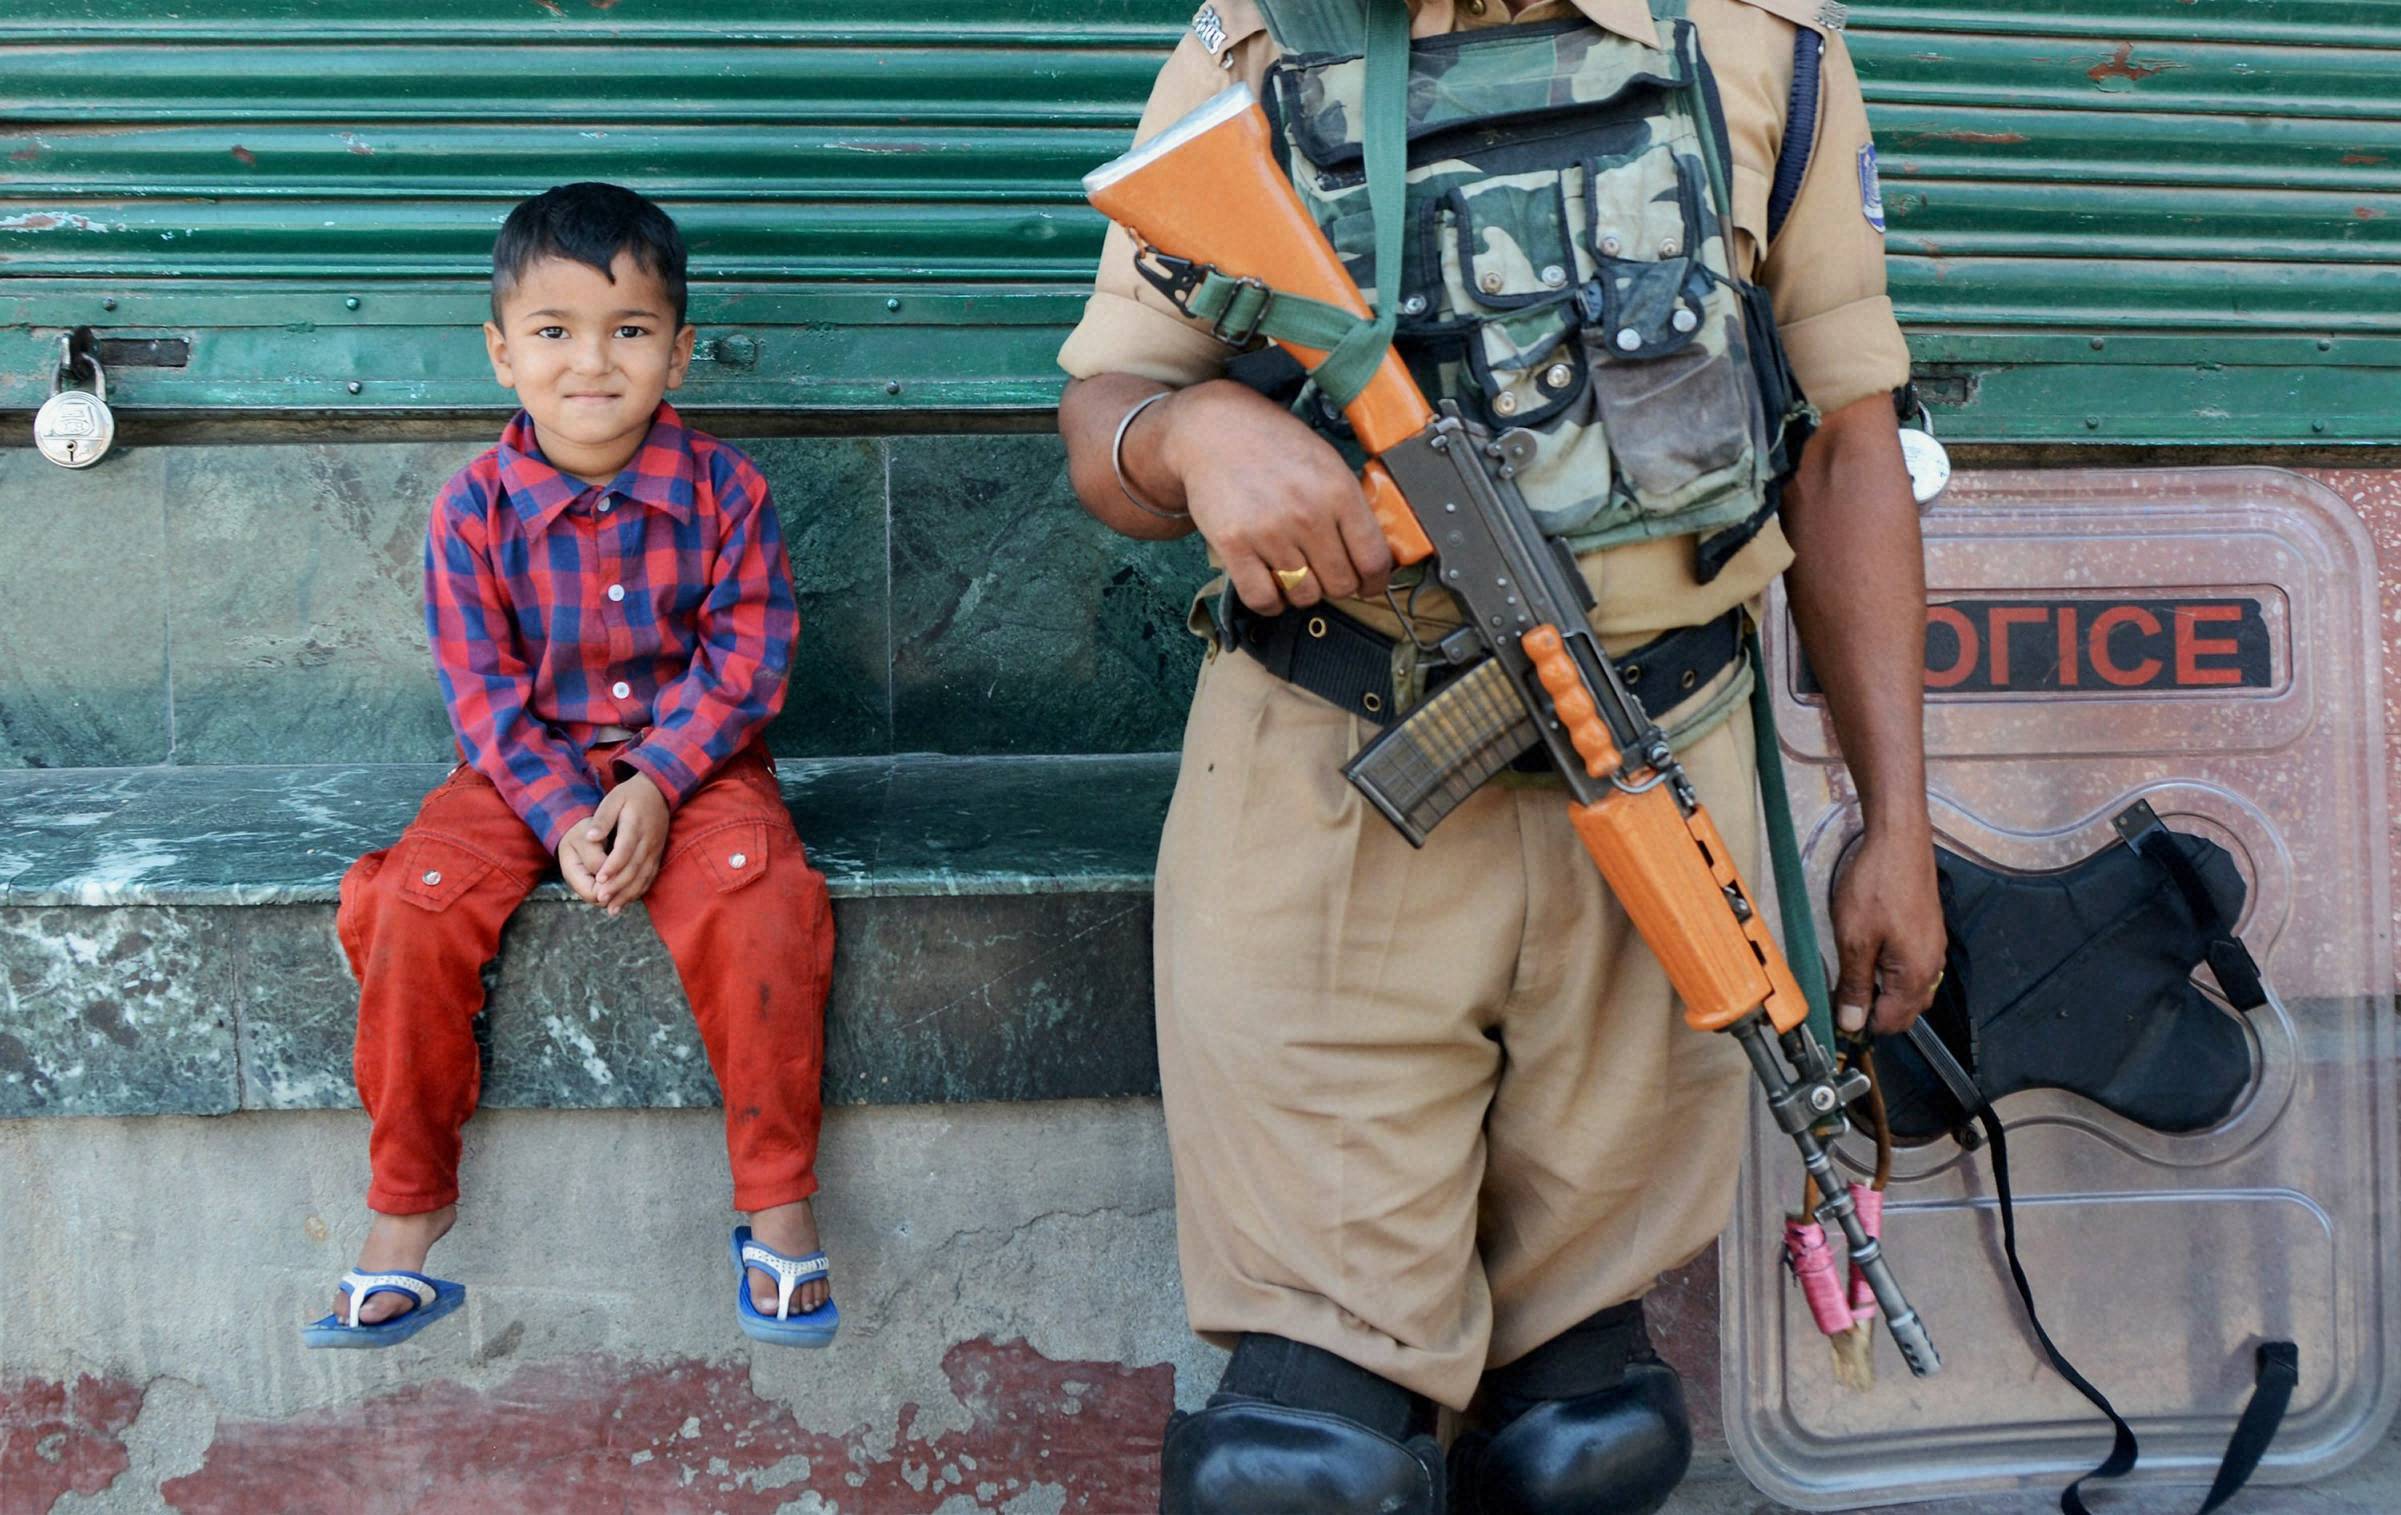 New age militancy and the state response to the growing violence in Kashmir